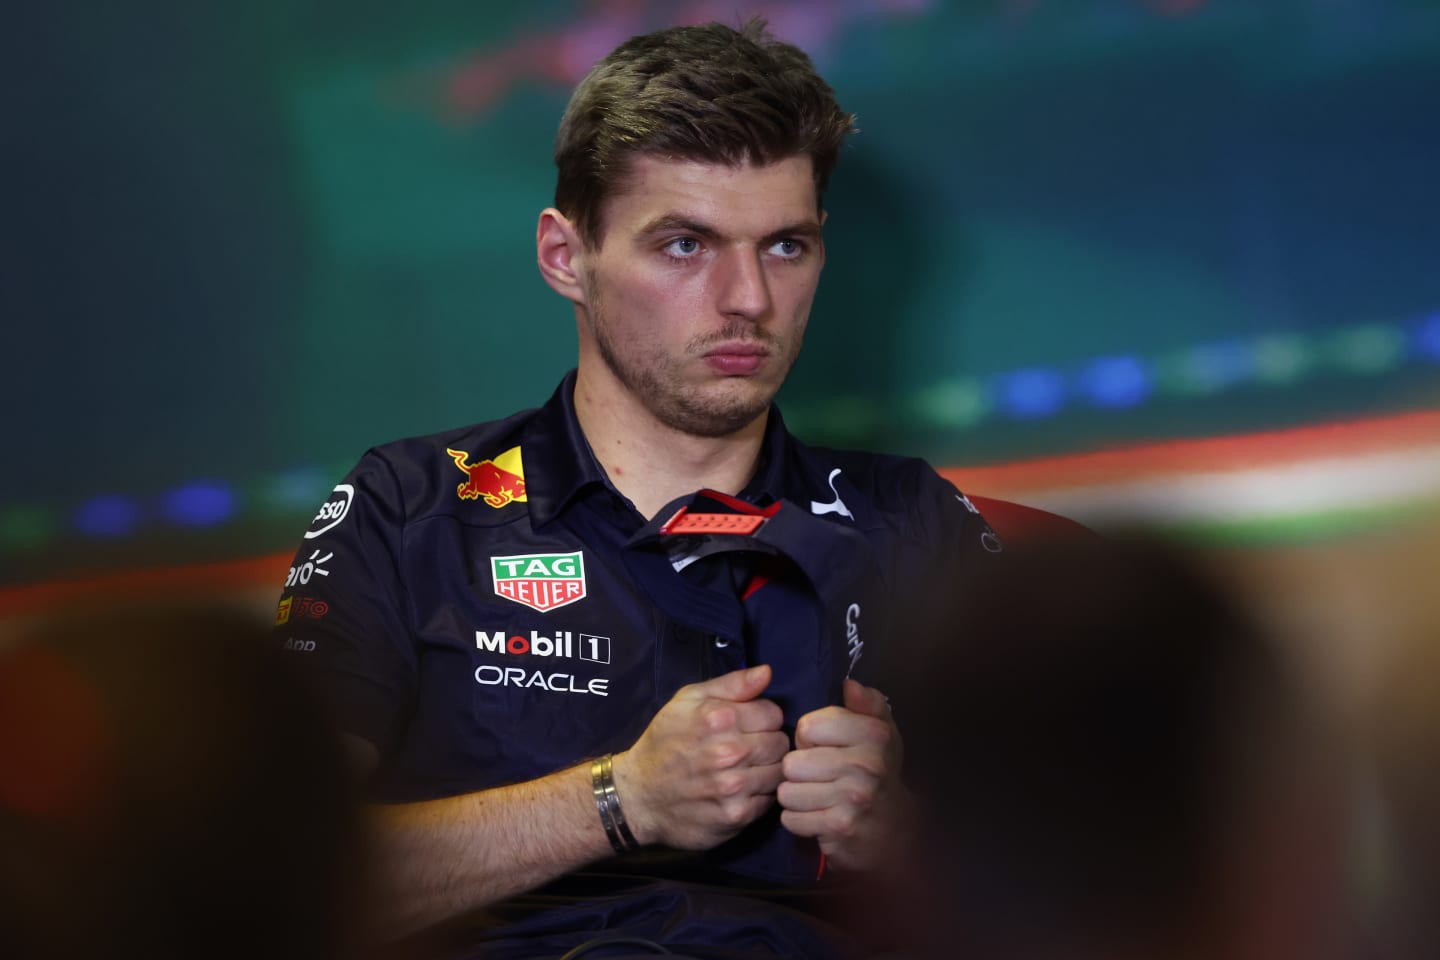 BUDAPEST, HUNGARY - JULY 28: Max Verstappen of the Netherlands and Oracle Red Bull Racing looks on in the Drivers Press Conference during previews ahead of the F1 Grand Prix of Hungary at Hungaroring on July 28, 2022 in Budapest, Hungary. (Photo by Bryn Lennon/Getty Images)